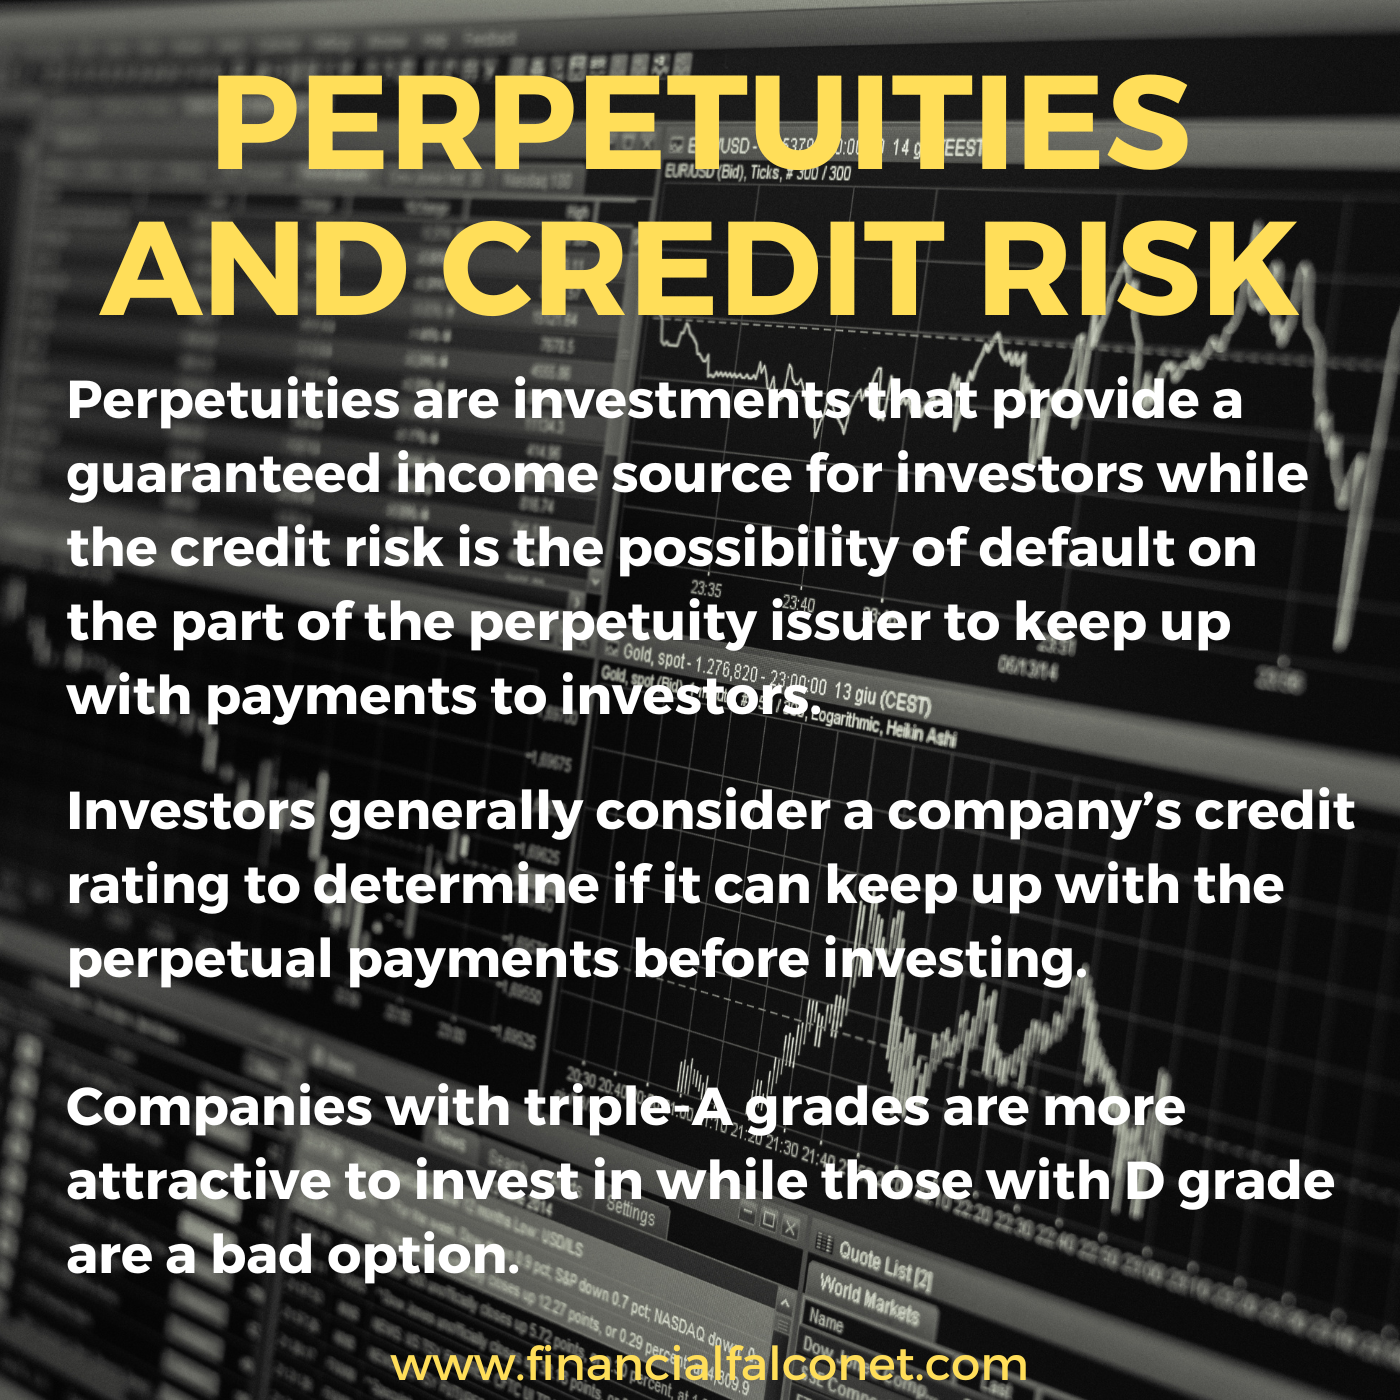 Perpetuities and credit risk